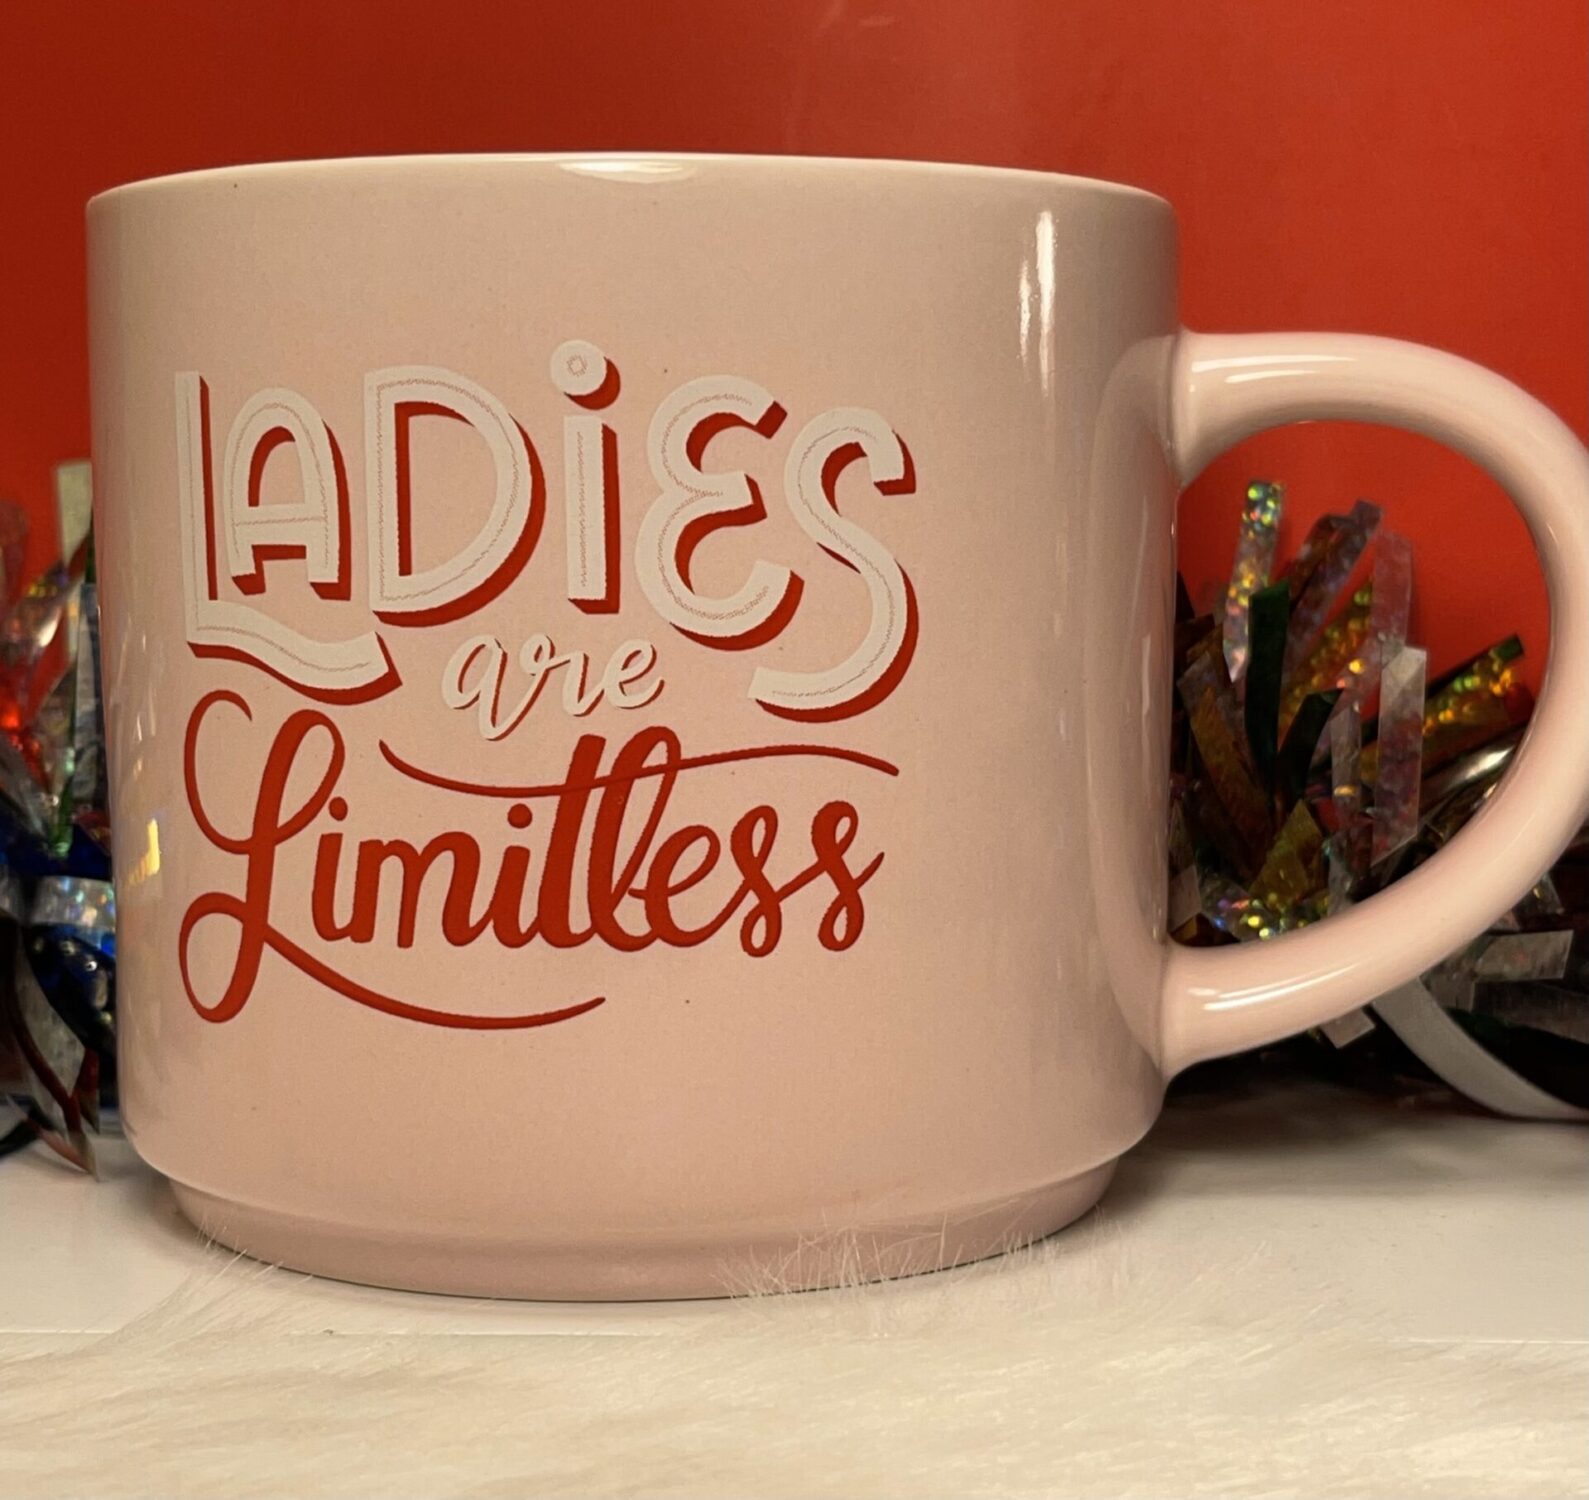 elum Home Ladies Are Limitless Pink Ceramic Mug with Empowering Women's  Message Coffee Cup Mug for Women